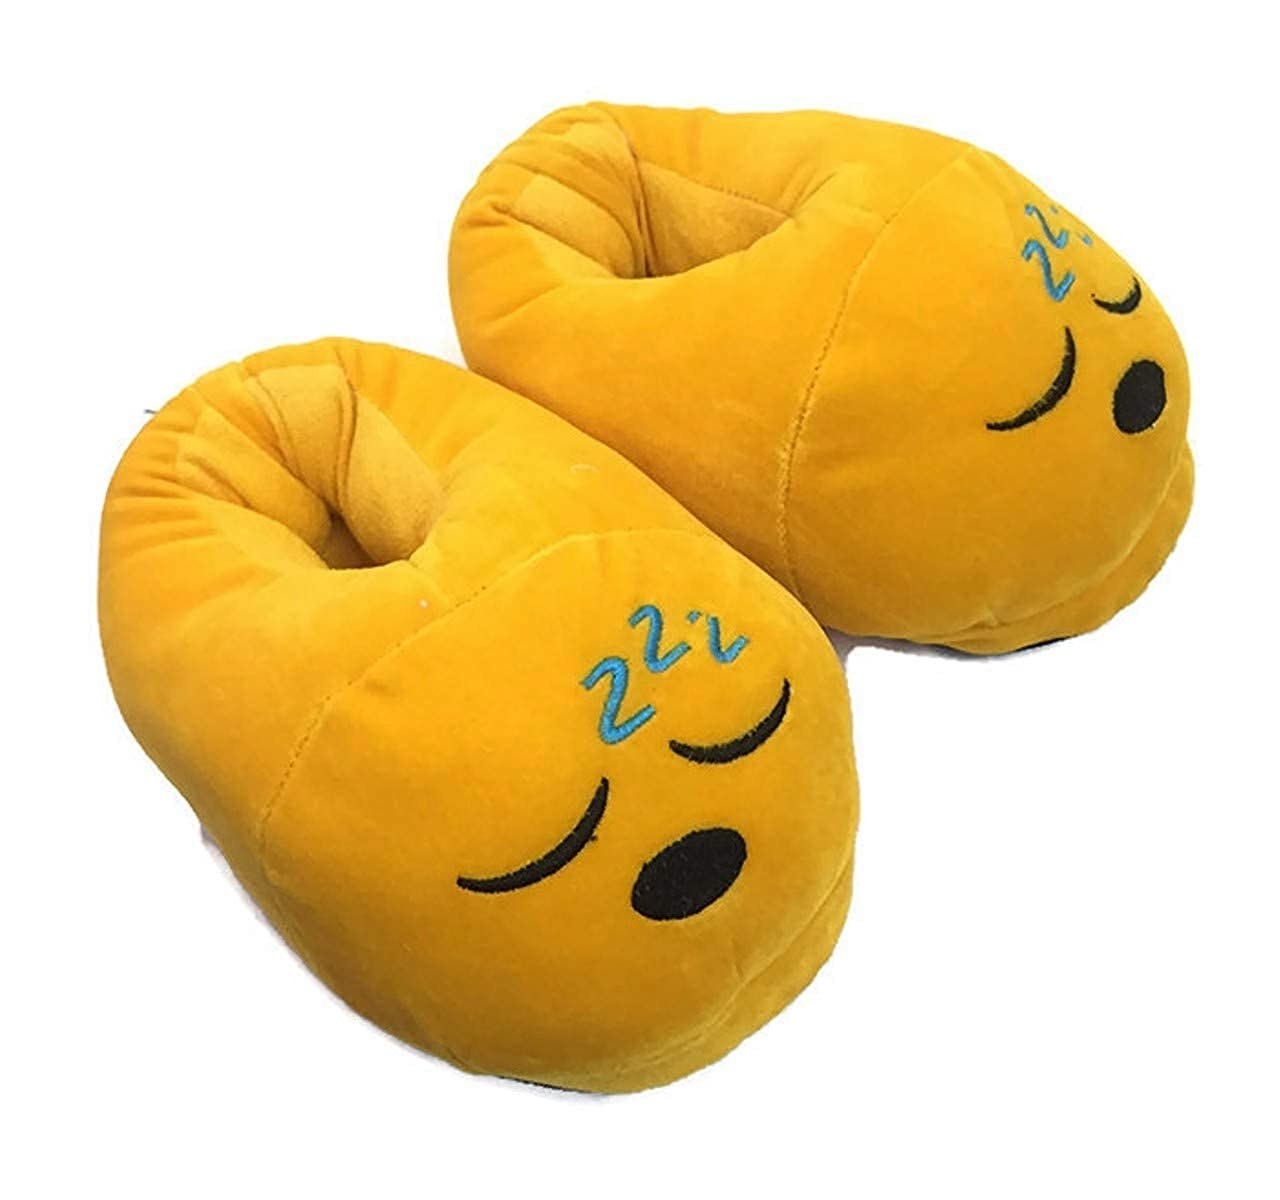 Bright yellow slippers with the snoozing face emoji on them